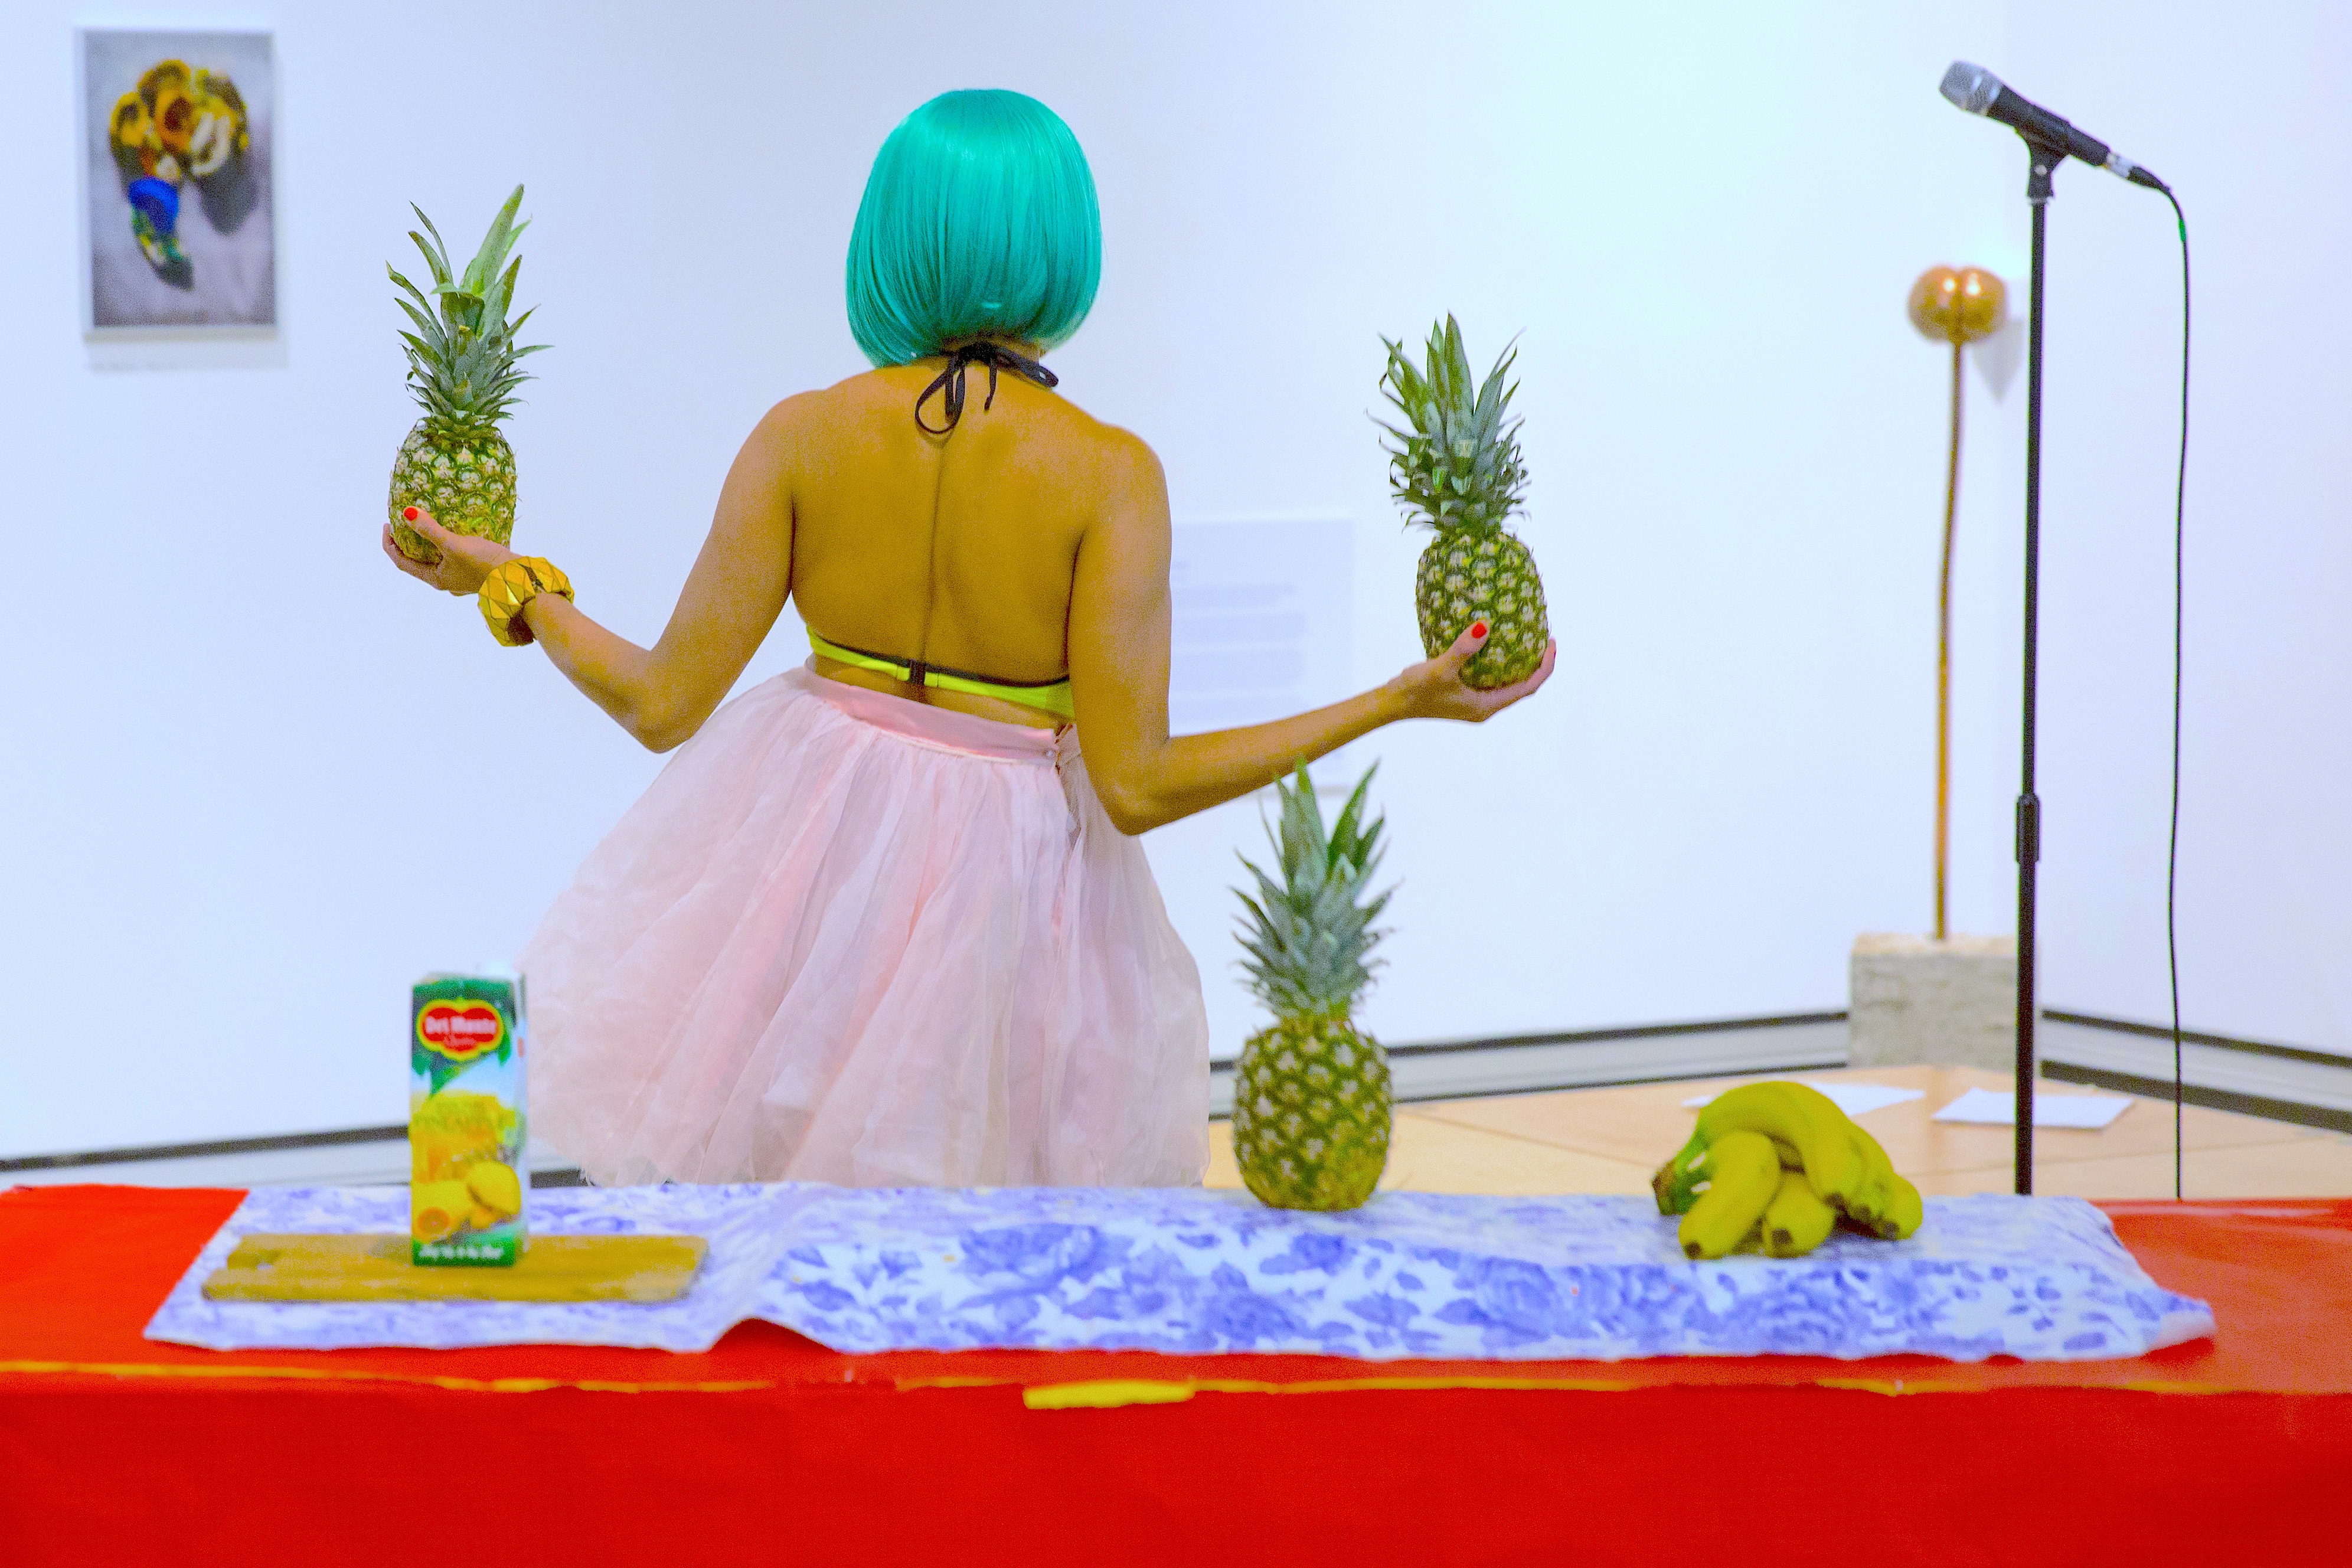 Priya Mistry holds two pineapples in front of a colourful table